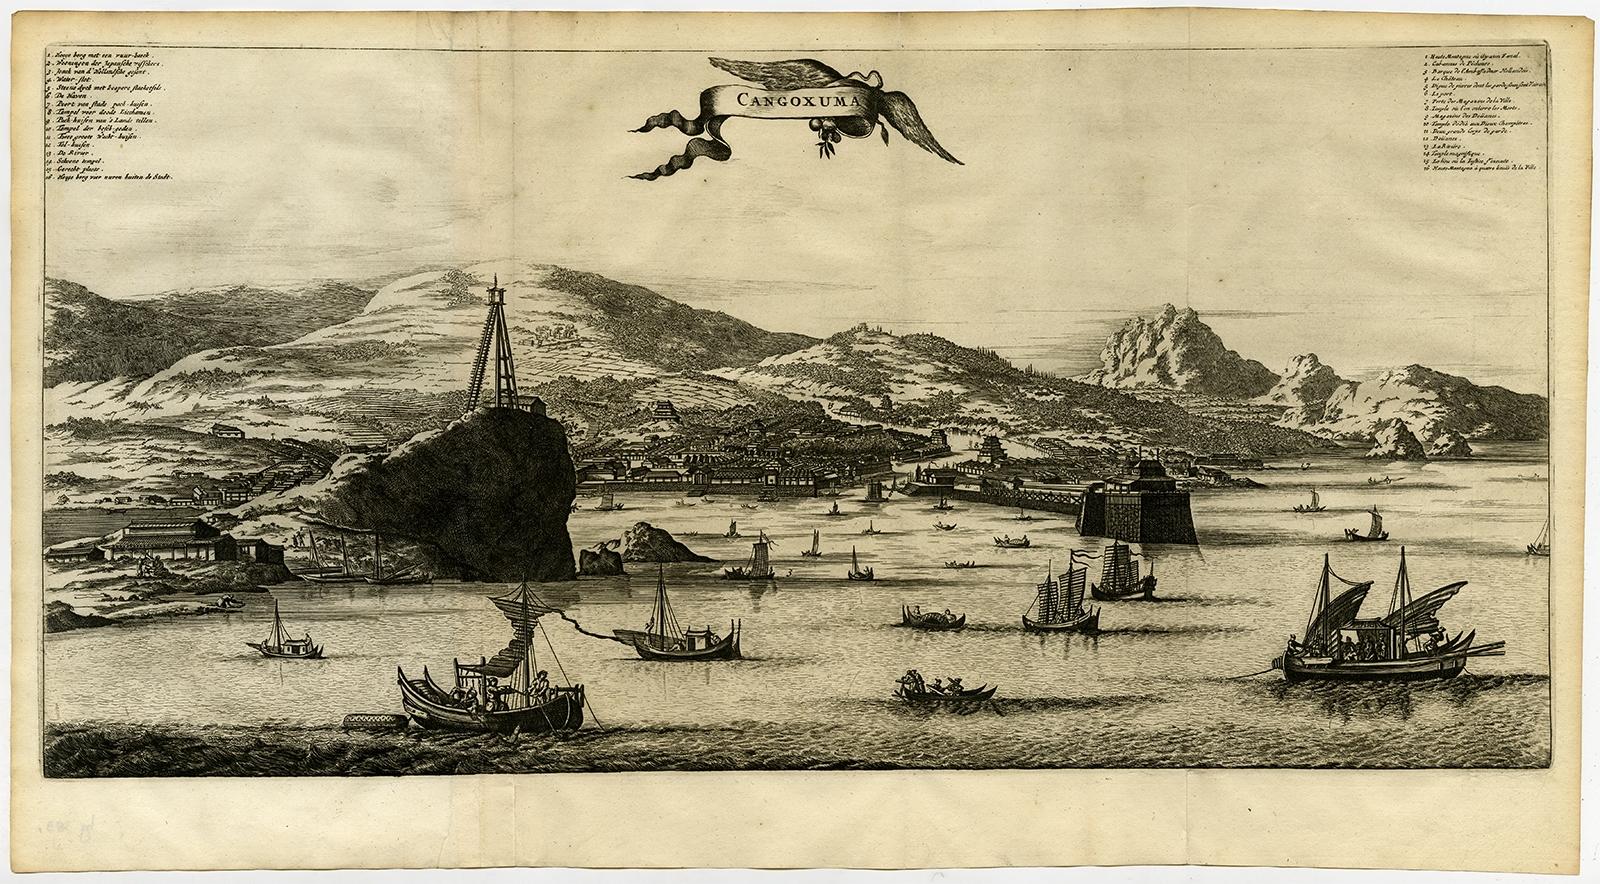 Rare Antique print, titled: 'Cangoxuma.' 

A stunning bird's eye view of the coastal city Cangoxuma (Kagoshima) in Japan. It shows several boats in the harbour, as well as the lighthouse. Arnoldus Montanus' 